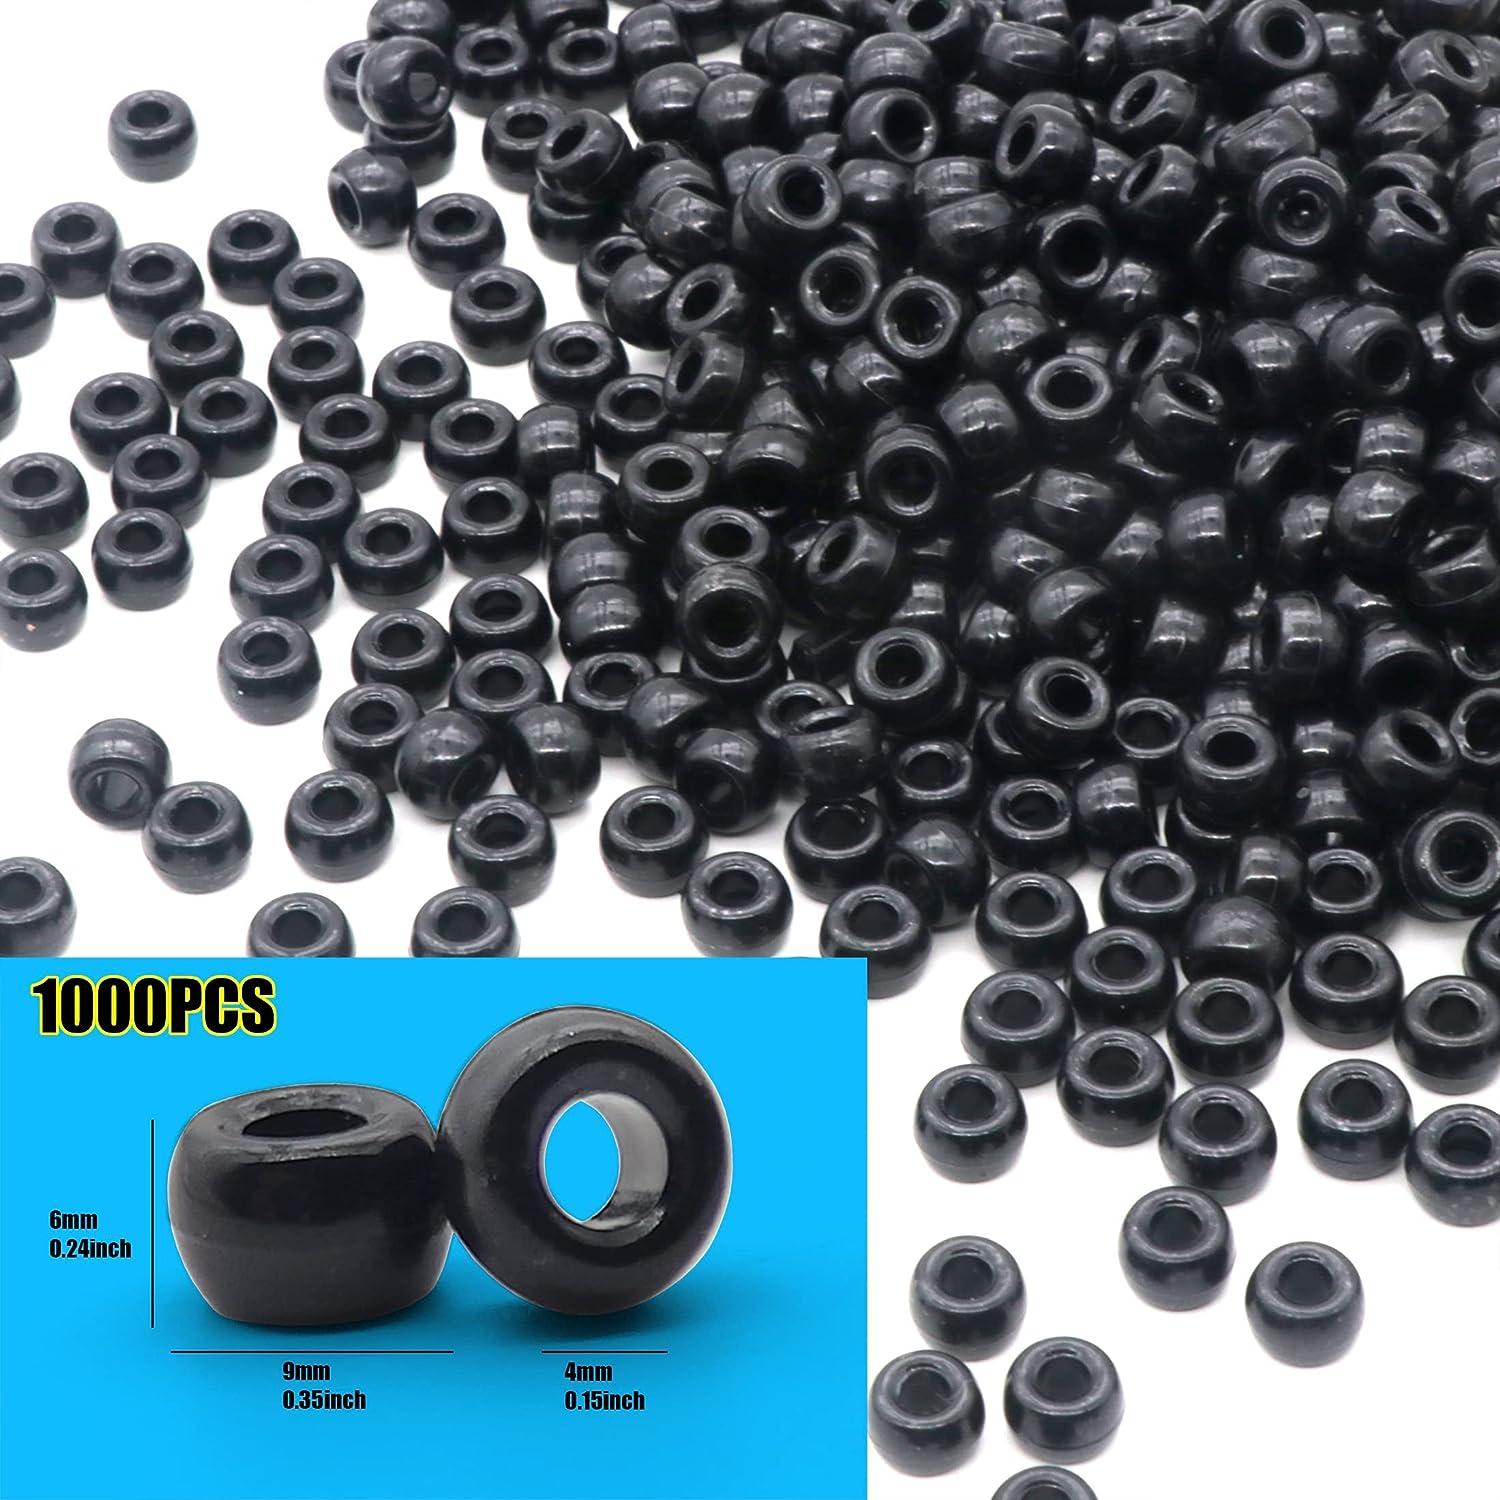 1000Pcs Pony Beads Bracelet 9mm Black Plastic Barrel Pony Beads for  Necklace,Hair Beads for Braids for Girls,Key Chain,Jewelry Making (Black)